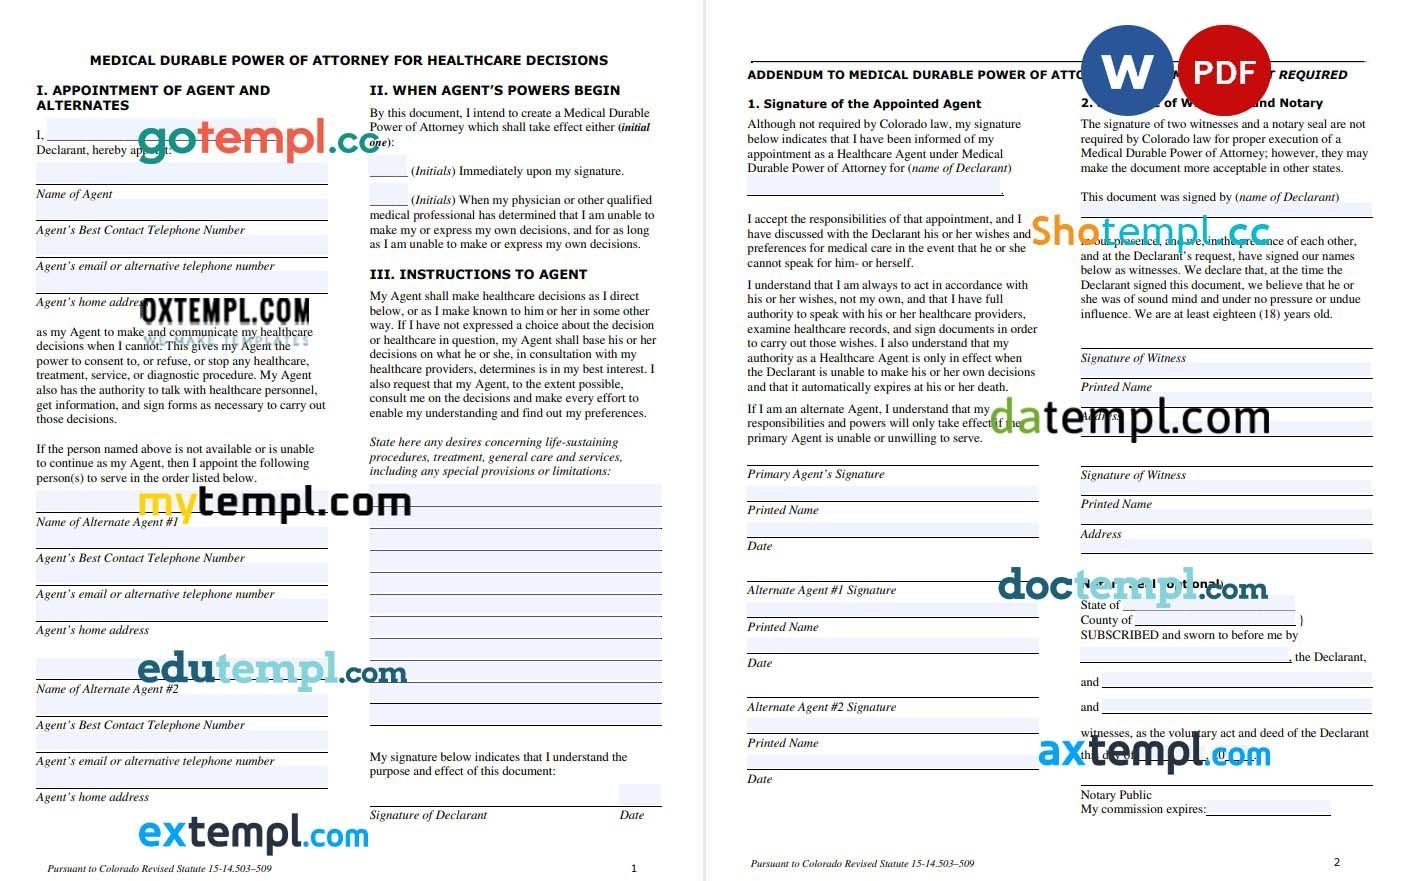 Colorado Medical Power of Attorney Form example, fully editable